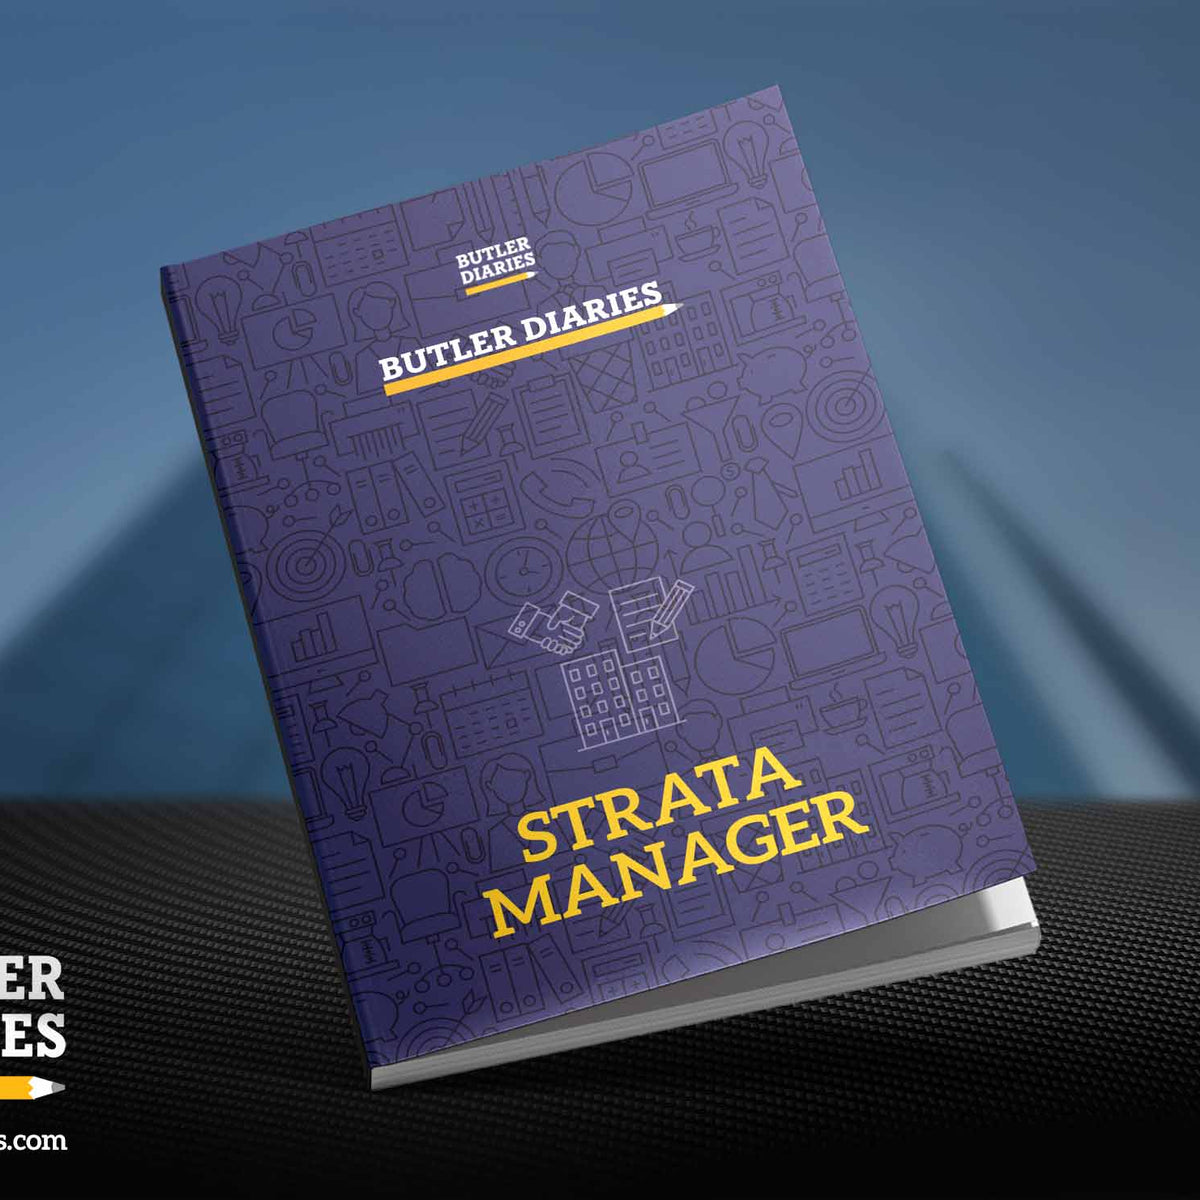 2023 Butler Professional Diaries: STRATA MANAGER - Butler Diaries